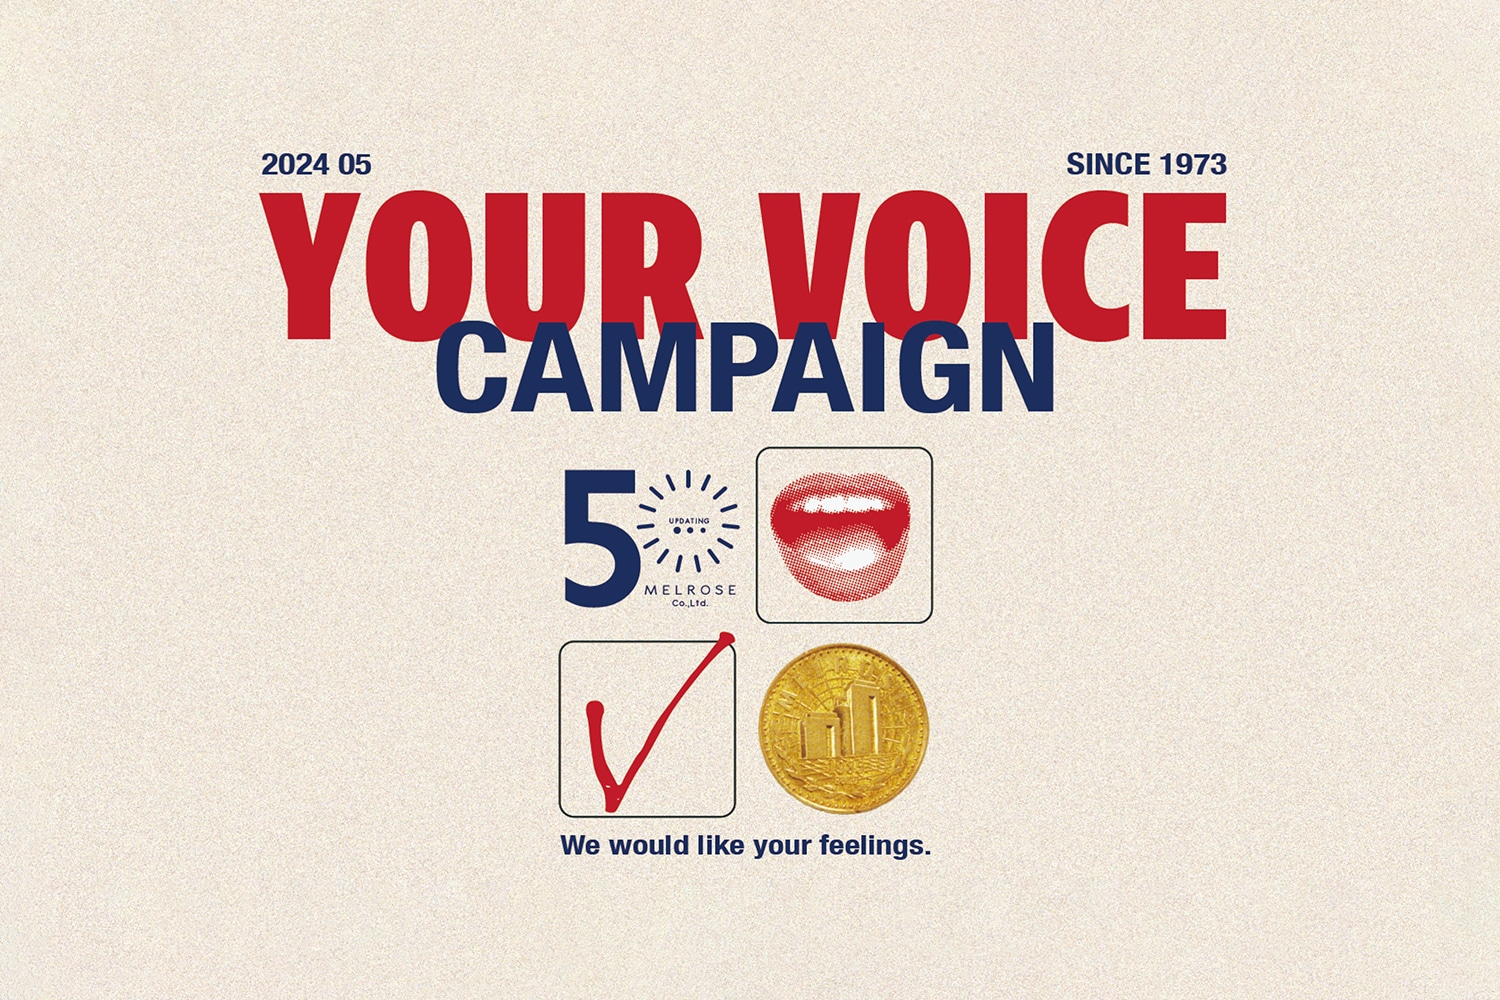 MELROSE 50th Anniversary ”YOUR VOICE CAMPAIGN”